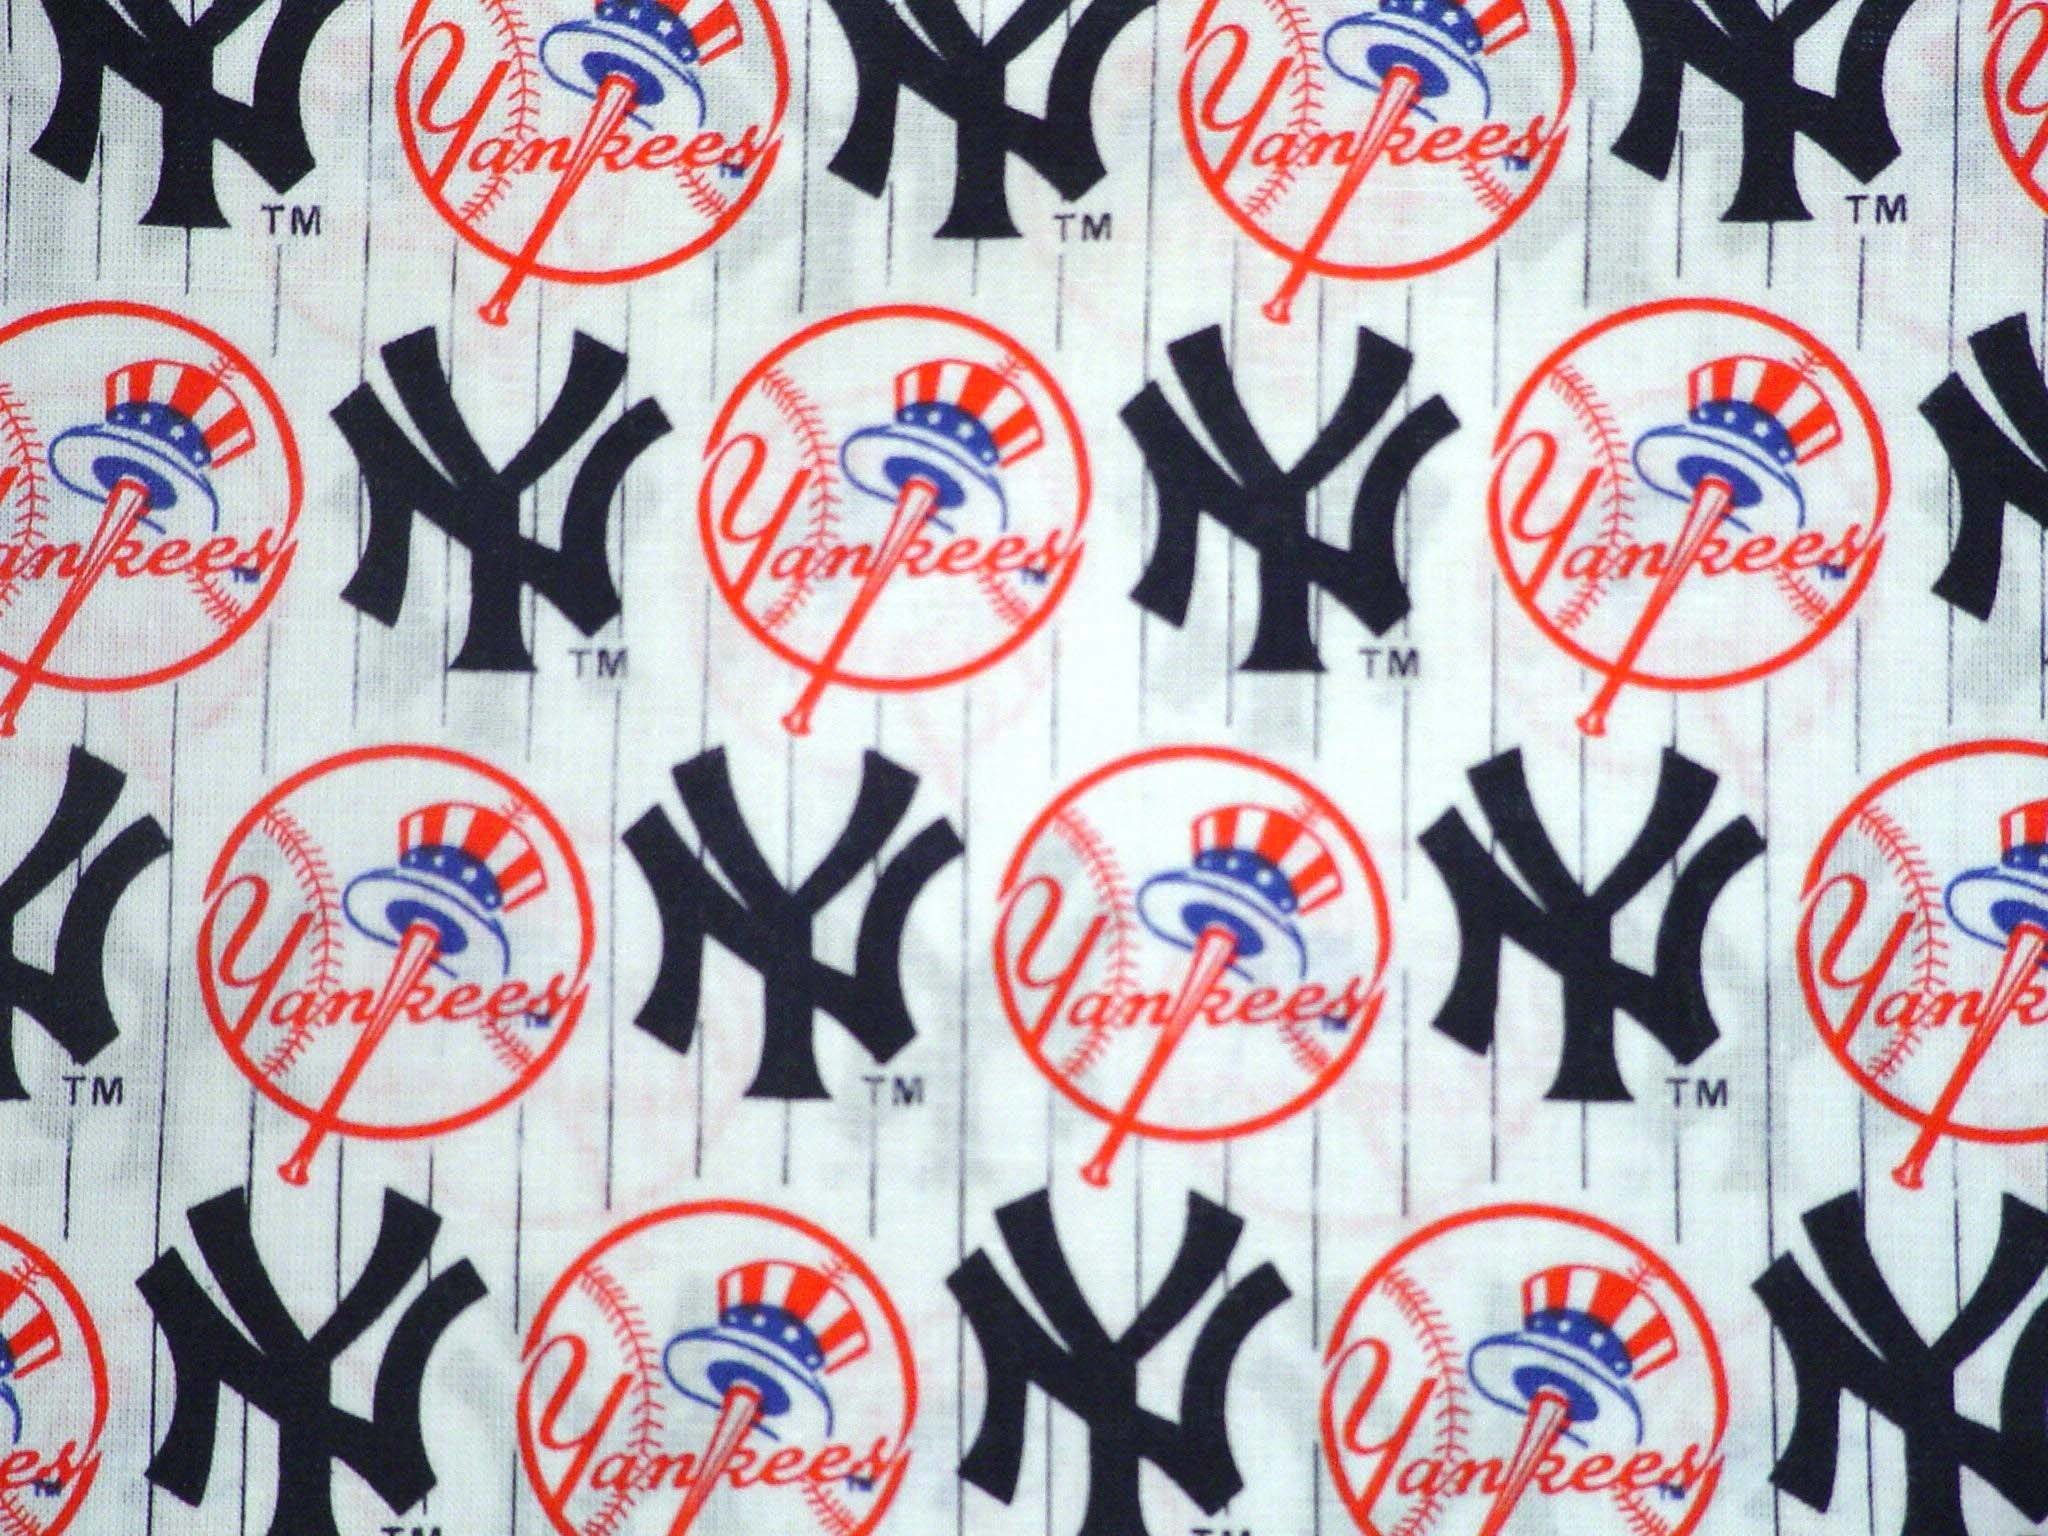 2048x1536 Themes Backgrounds Collection New York Yankees